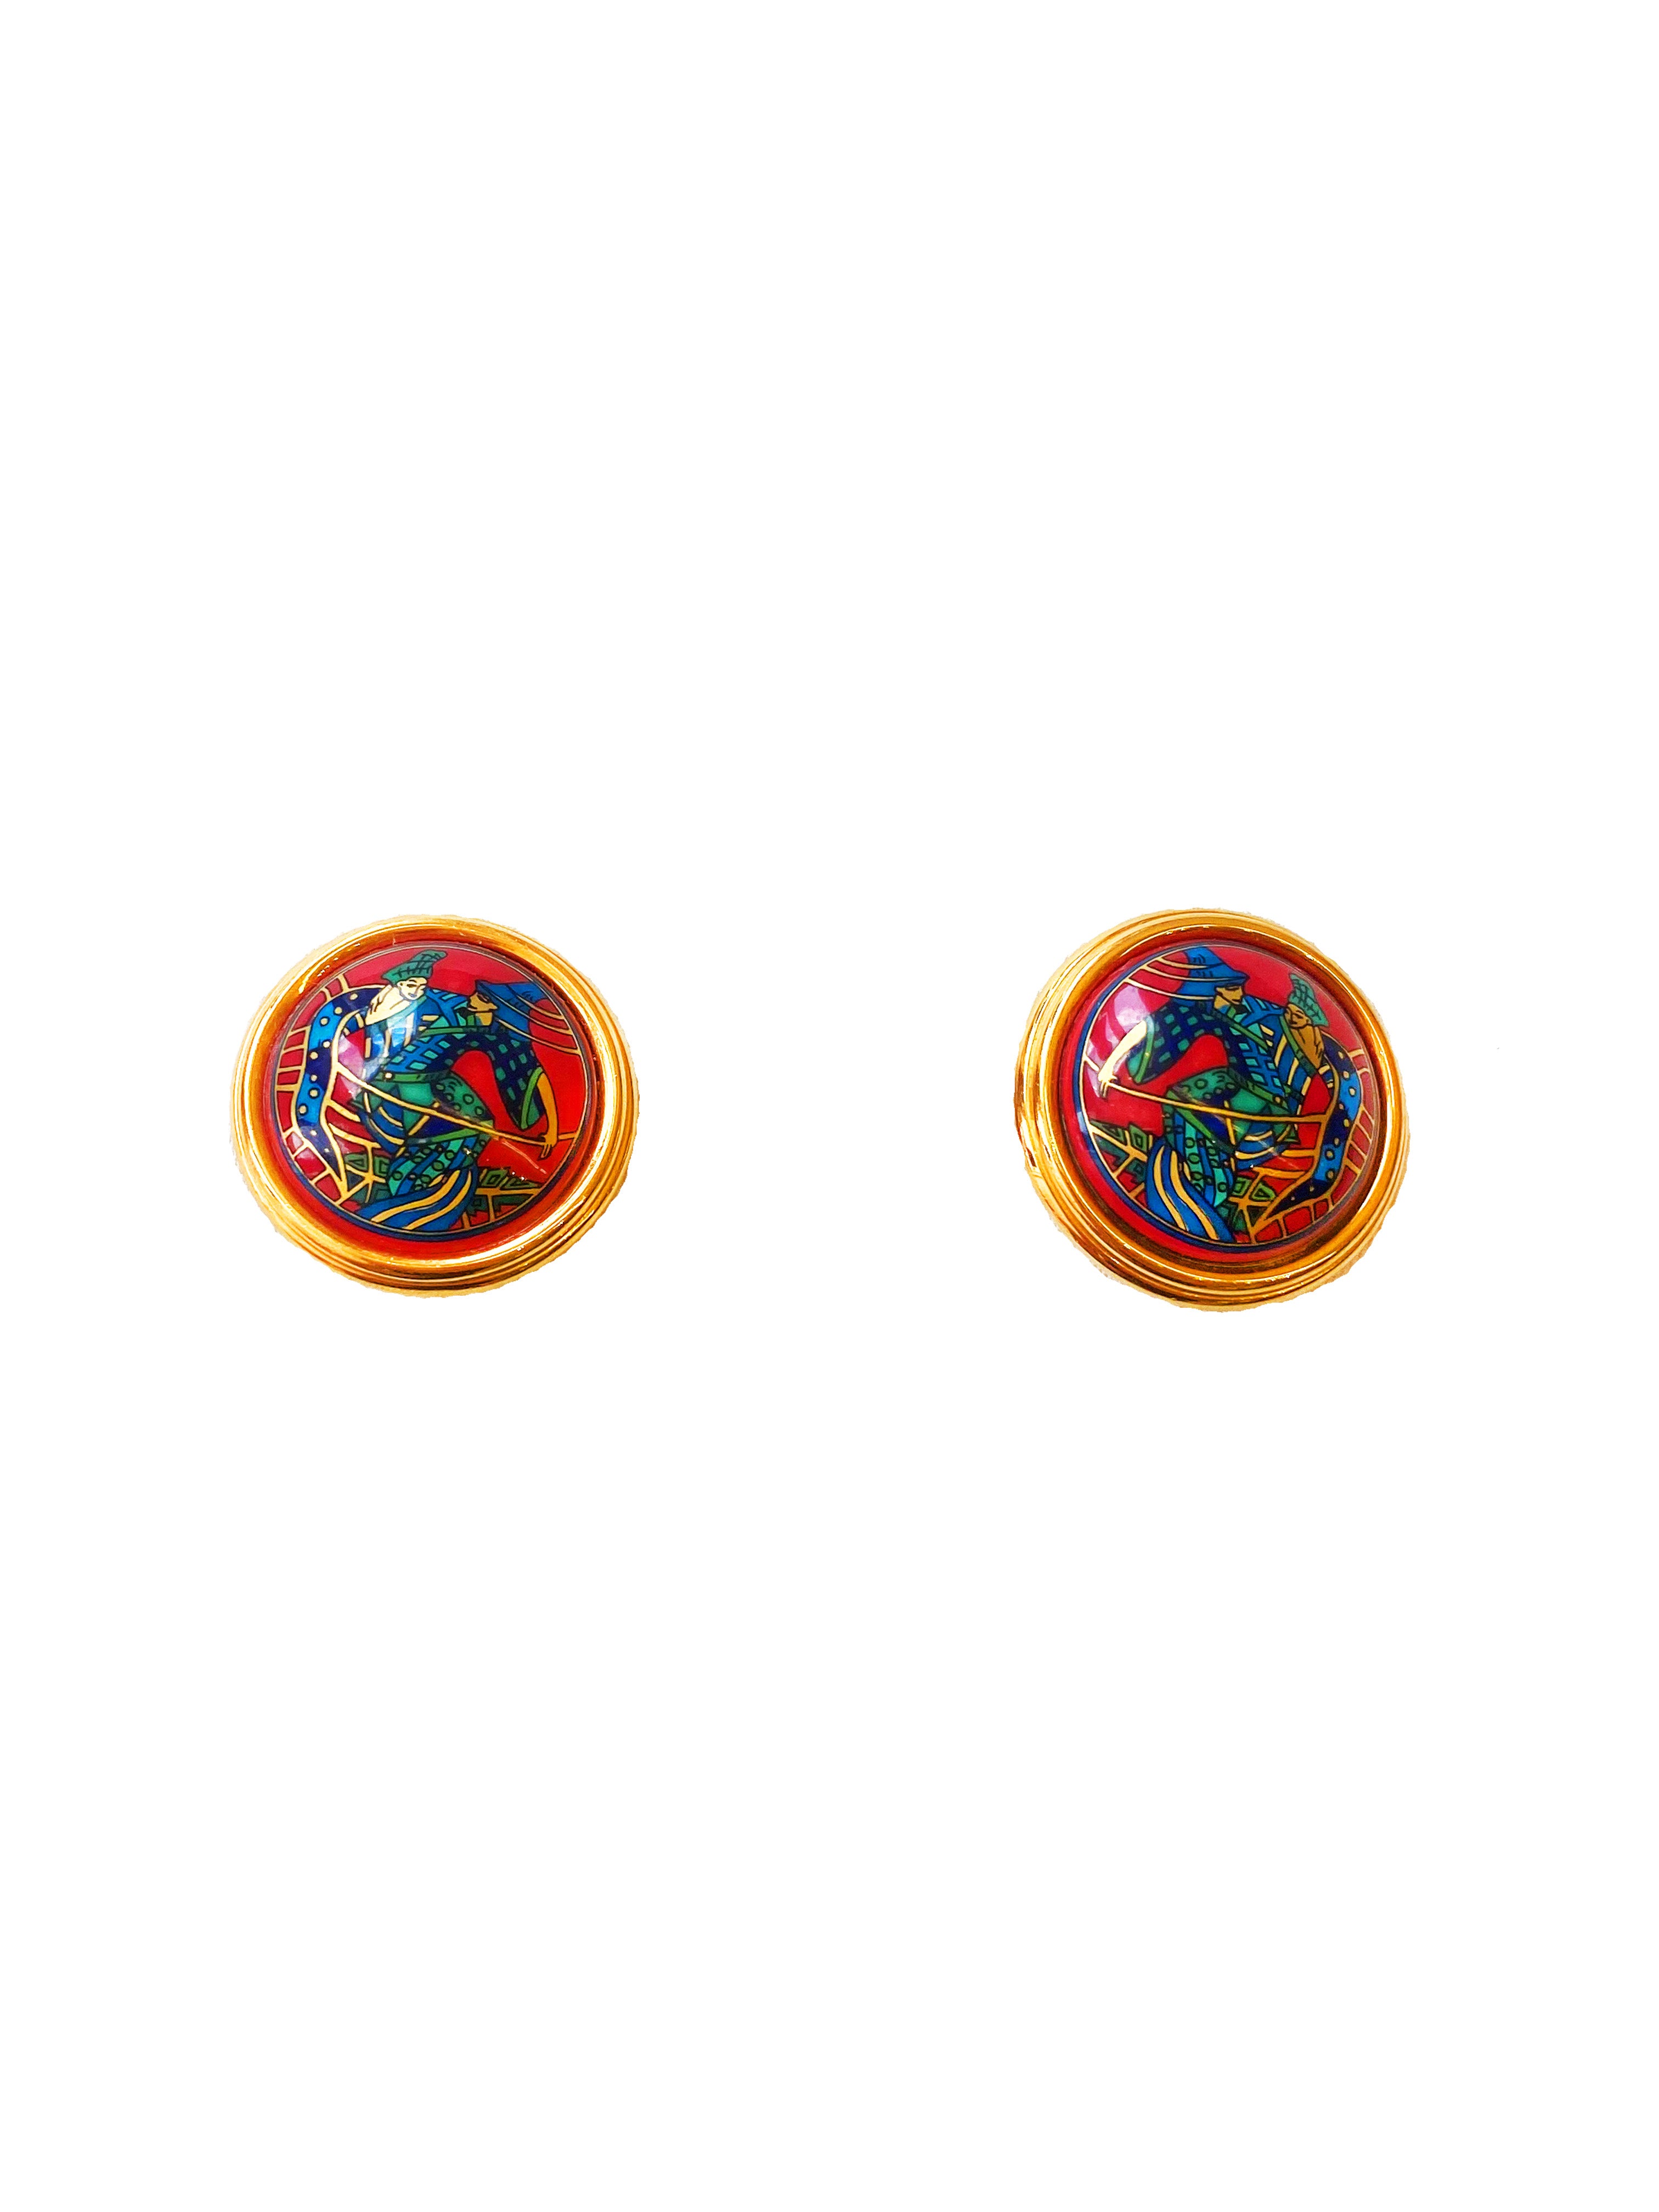 Hermès 1990s Gold Coral Patterned Clip On Earrings